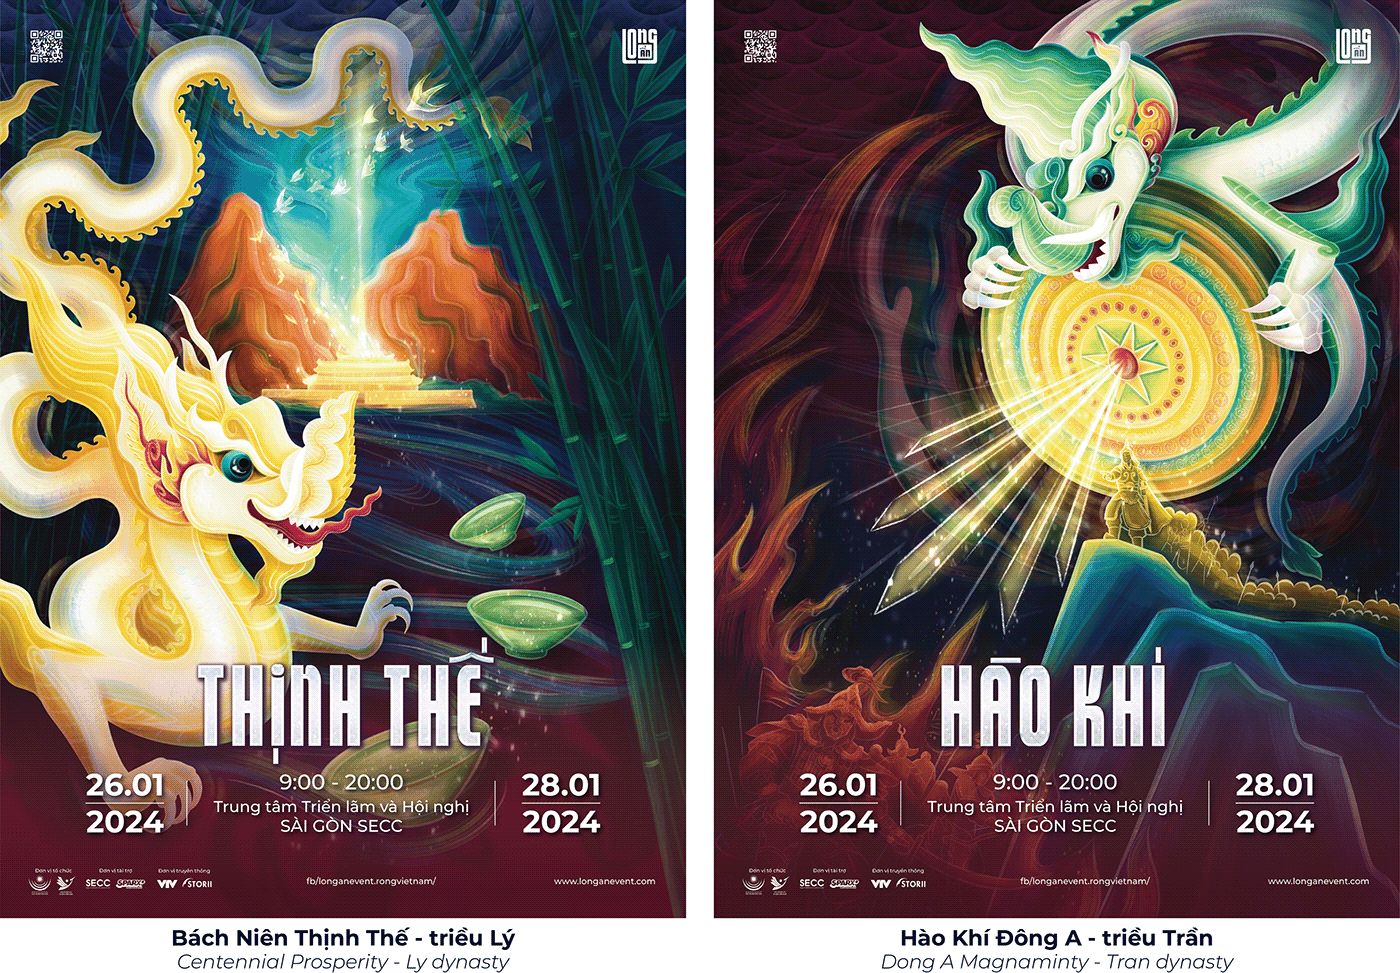 Event Design art direction  ILLUSTRATION  traditional vietnam art graphic design  dragon new year chinese new year